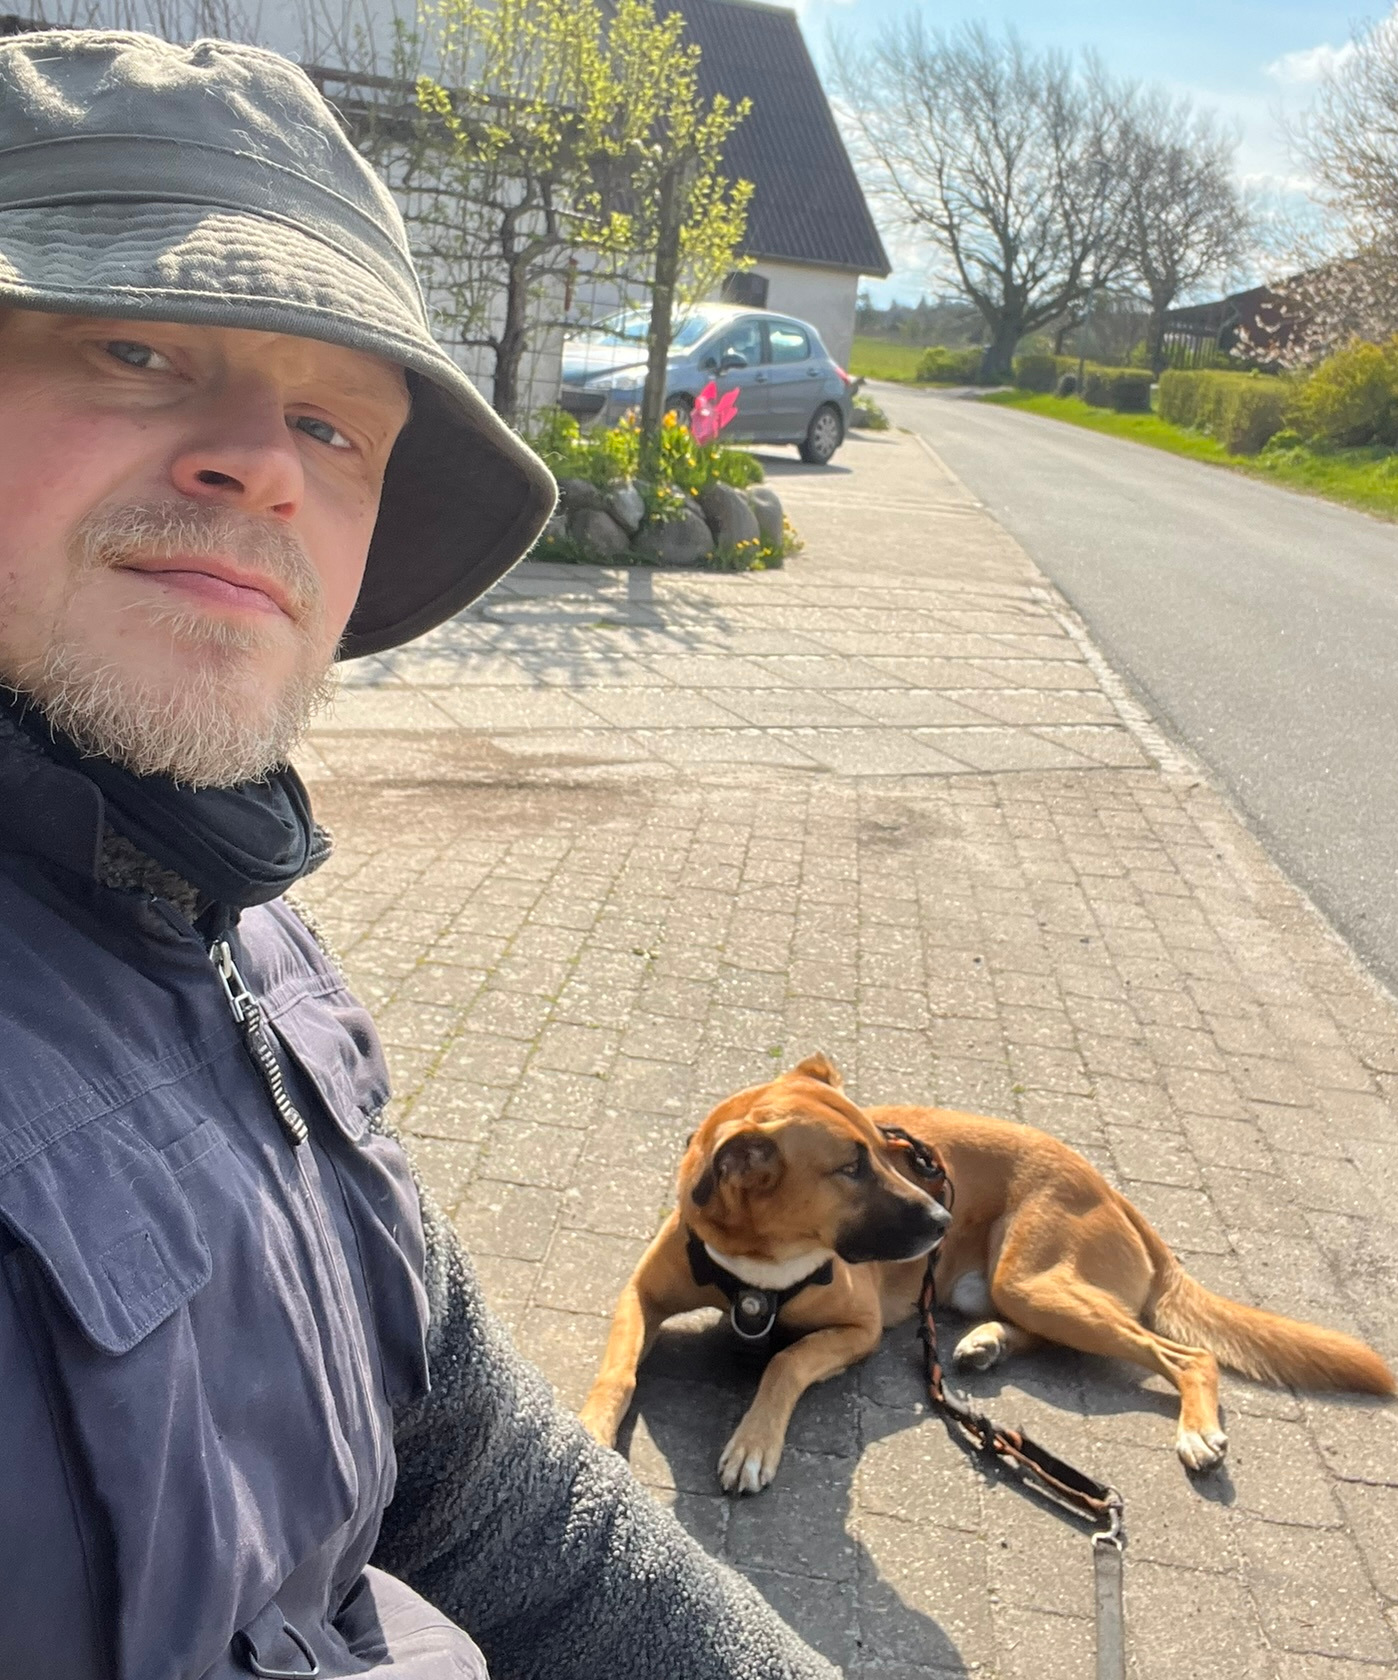 The author and his dog